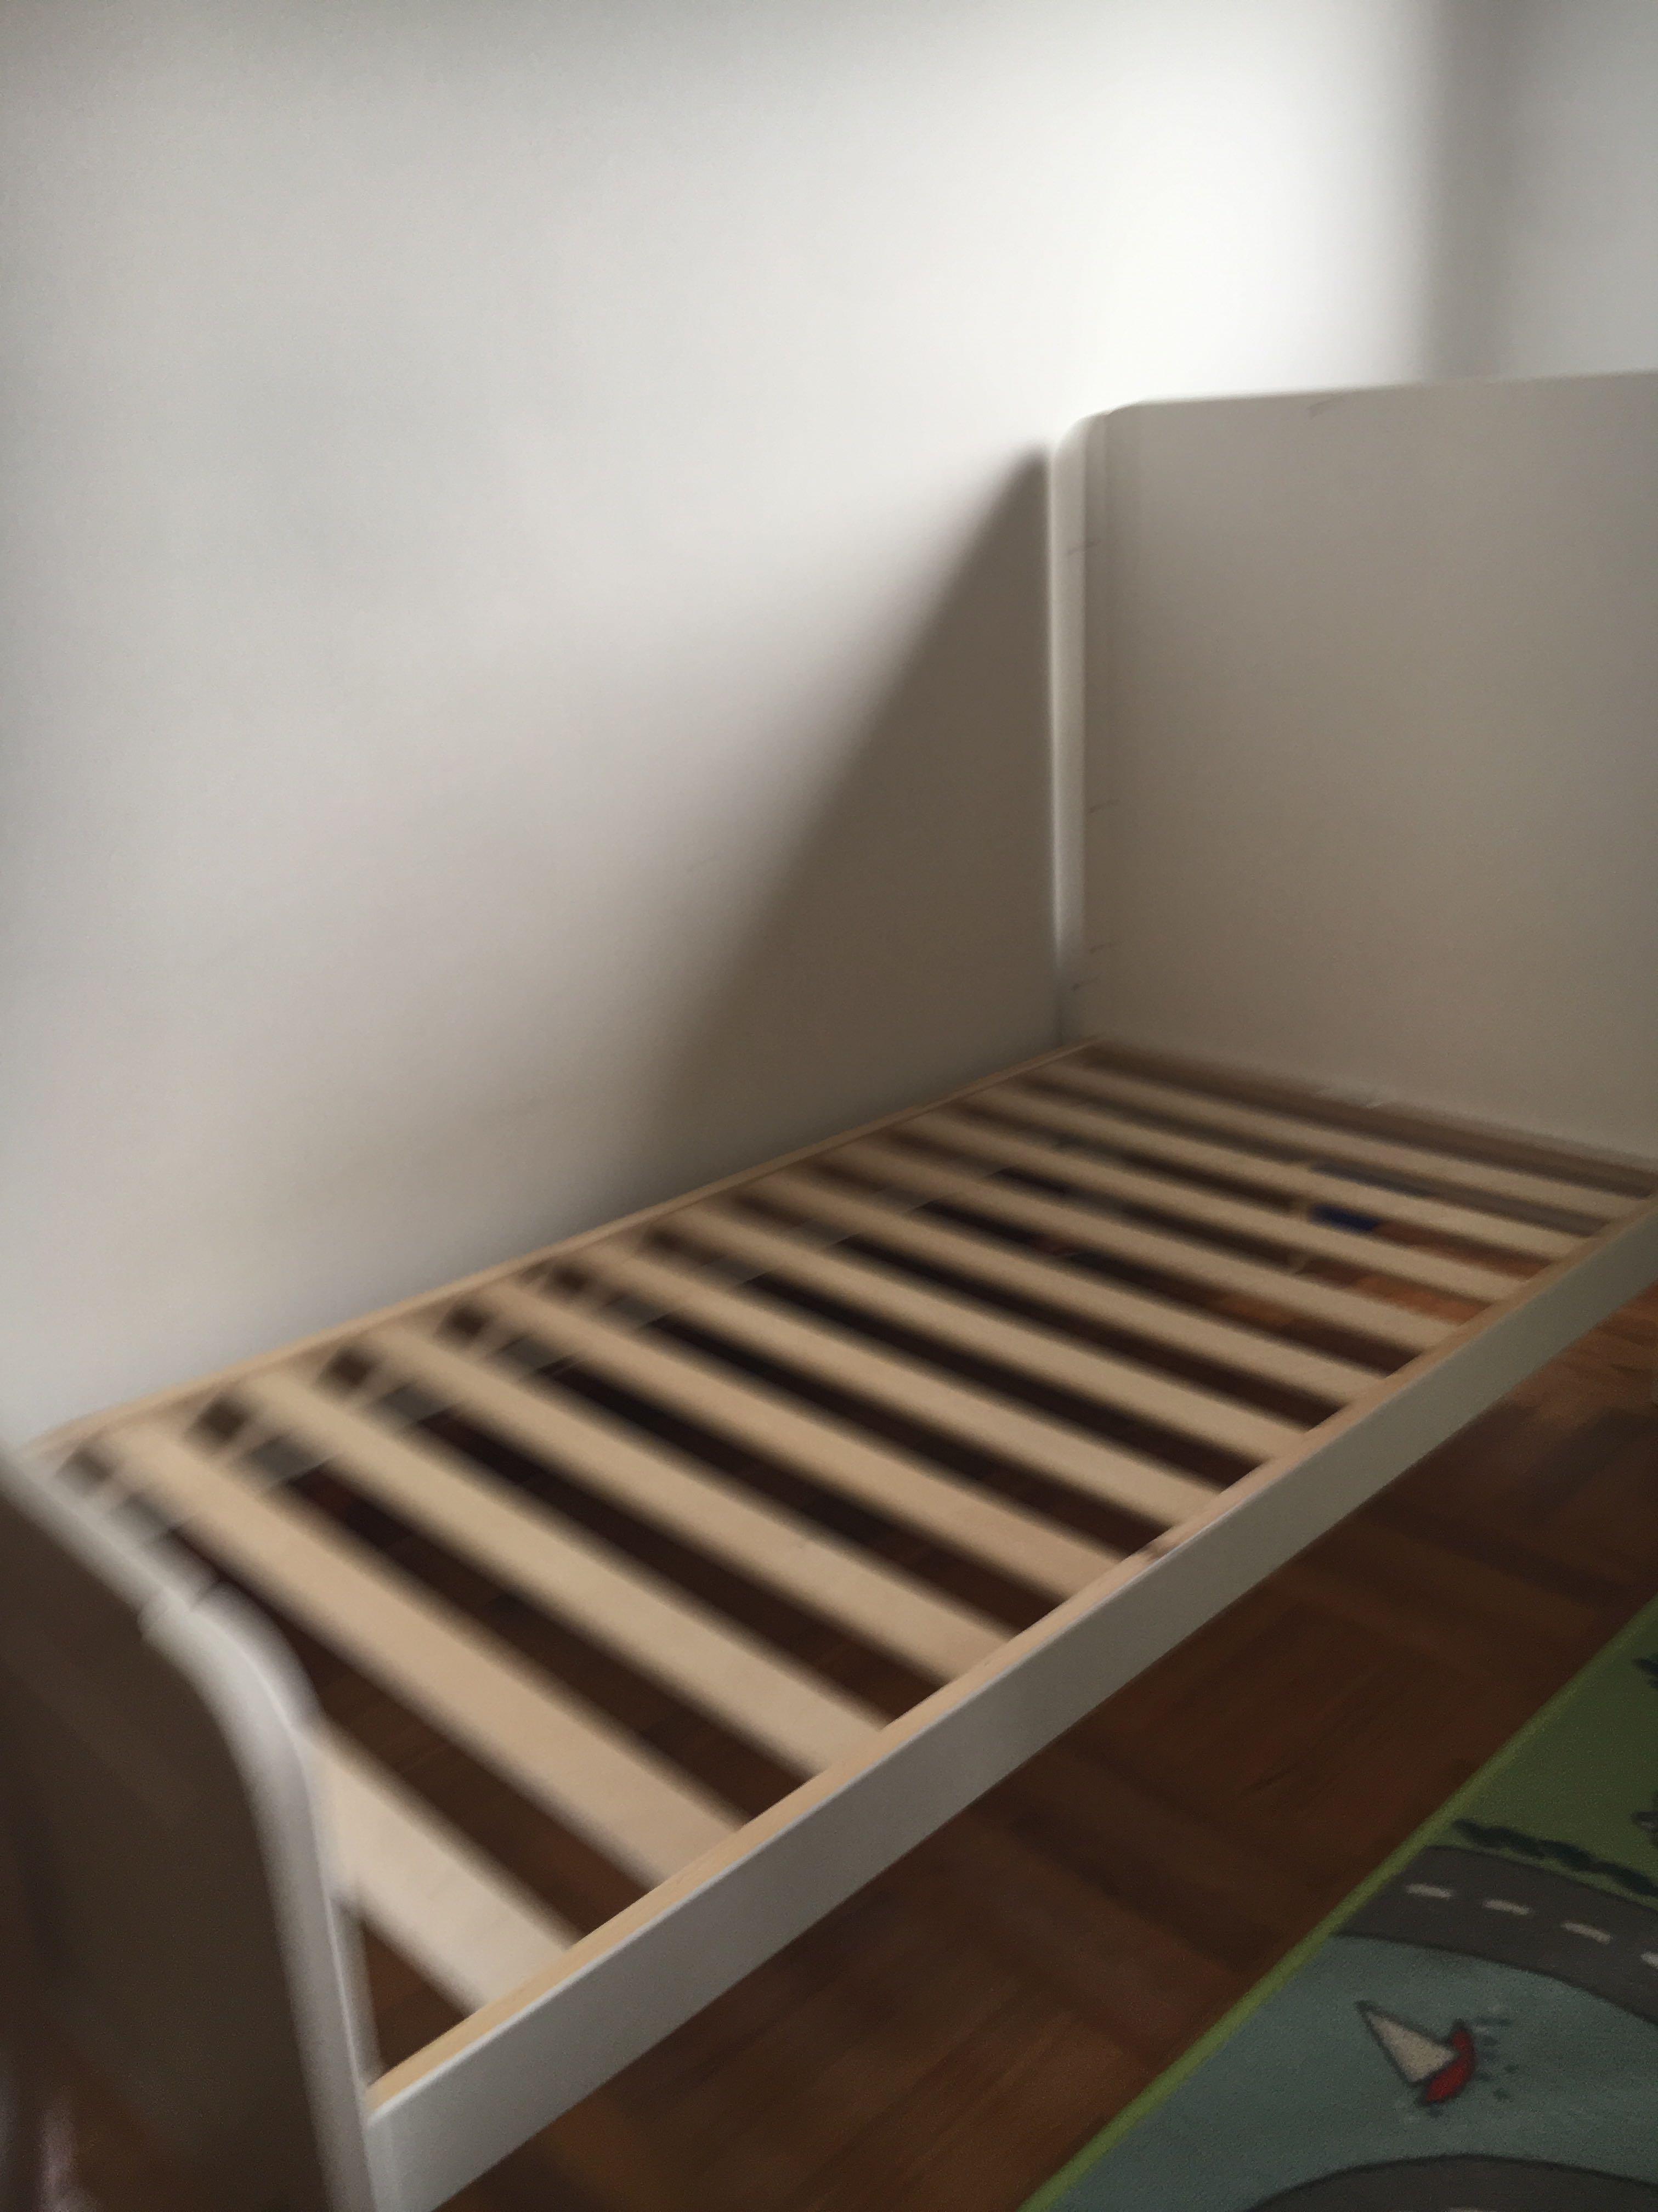 cot bed with mattress included